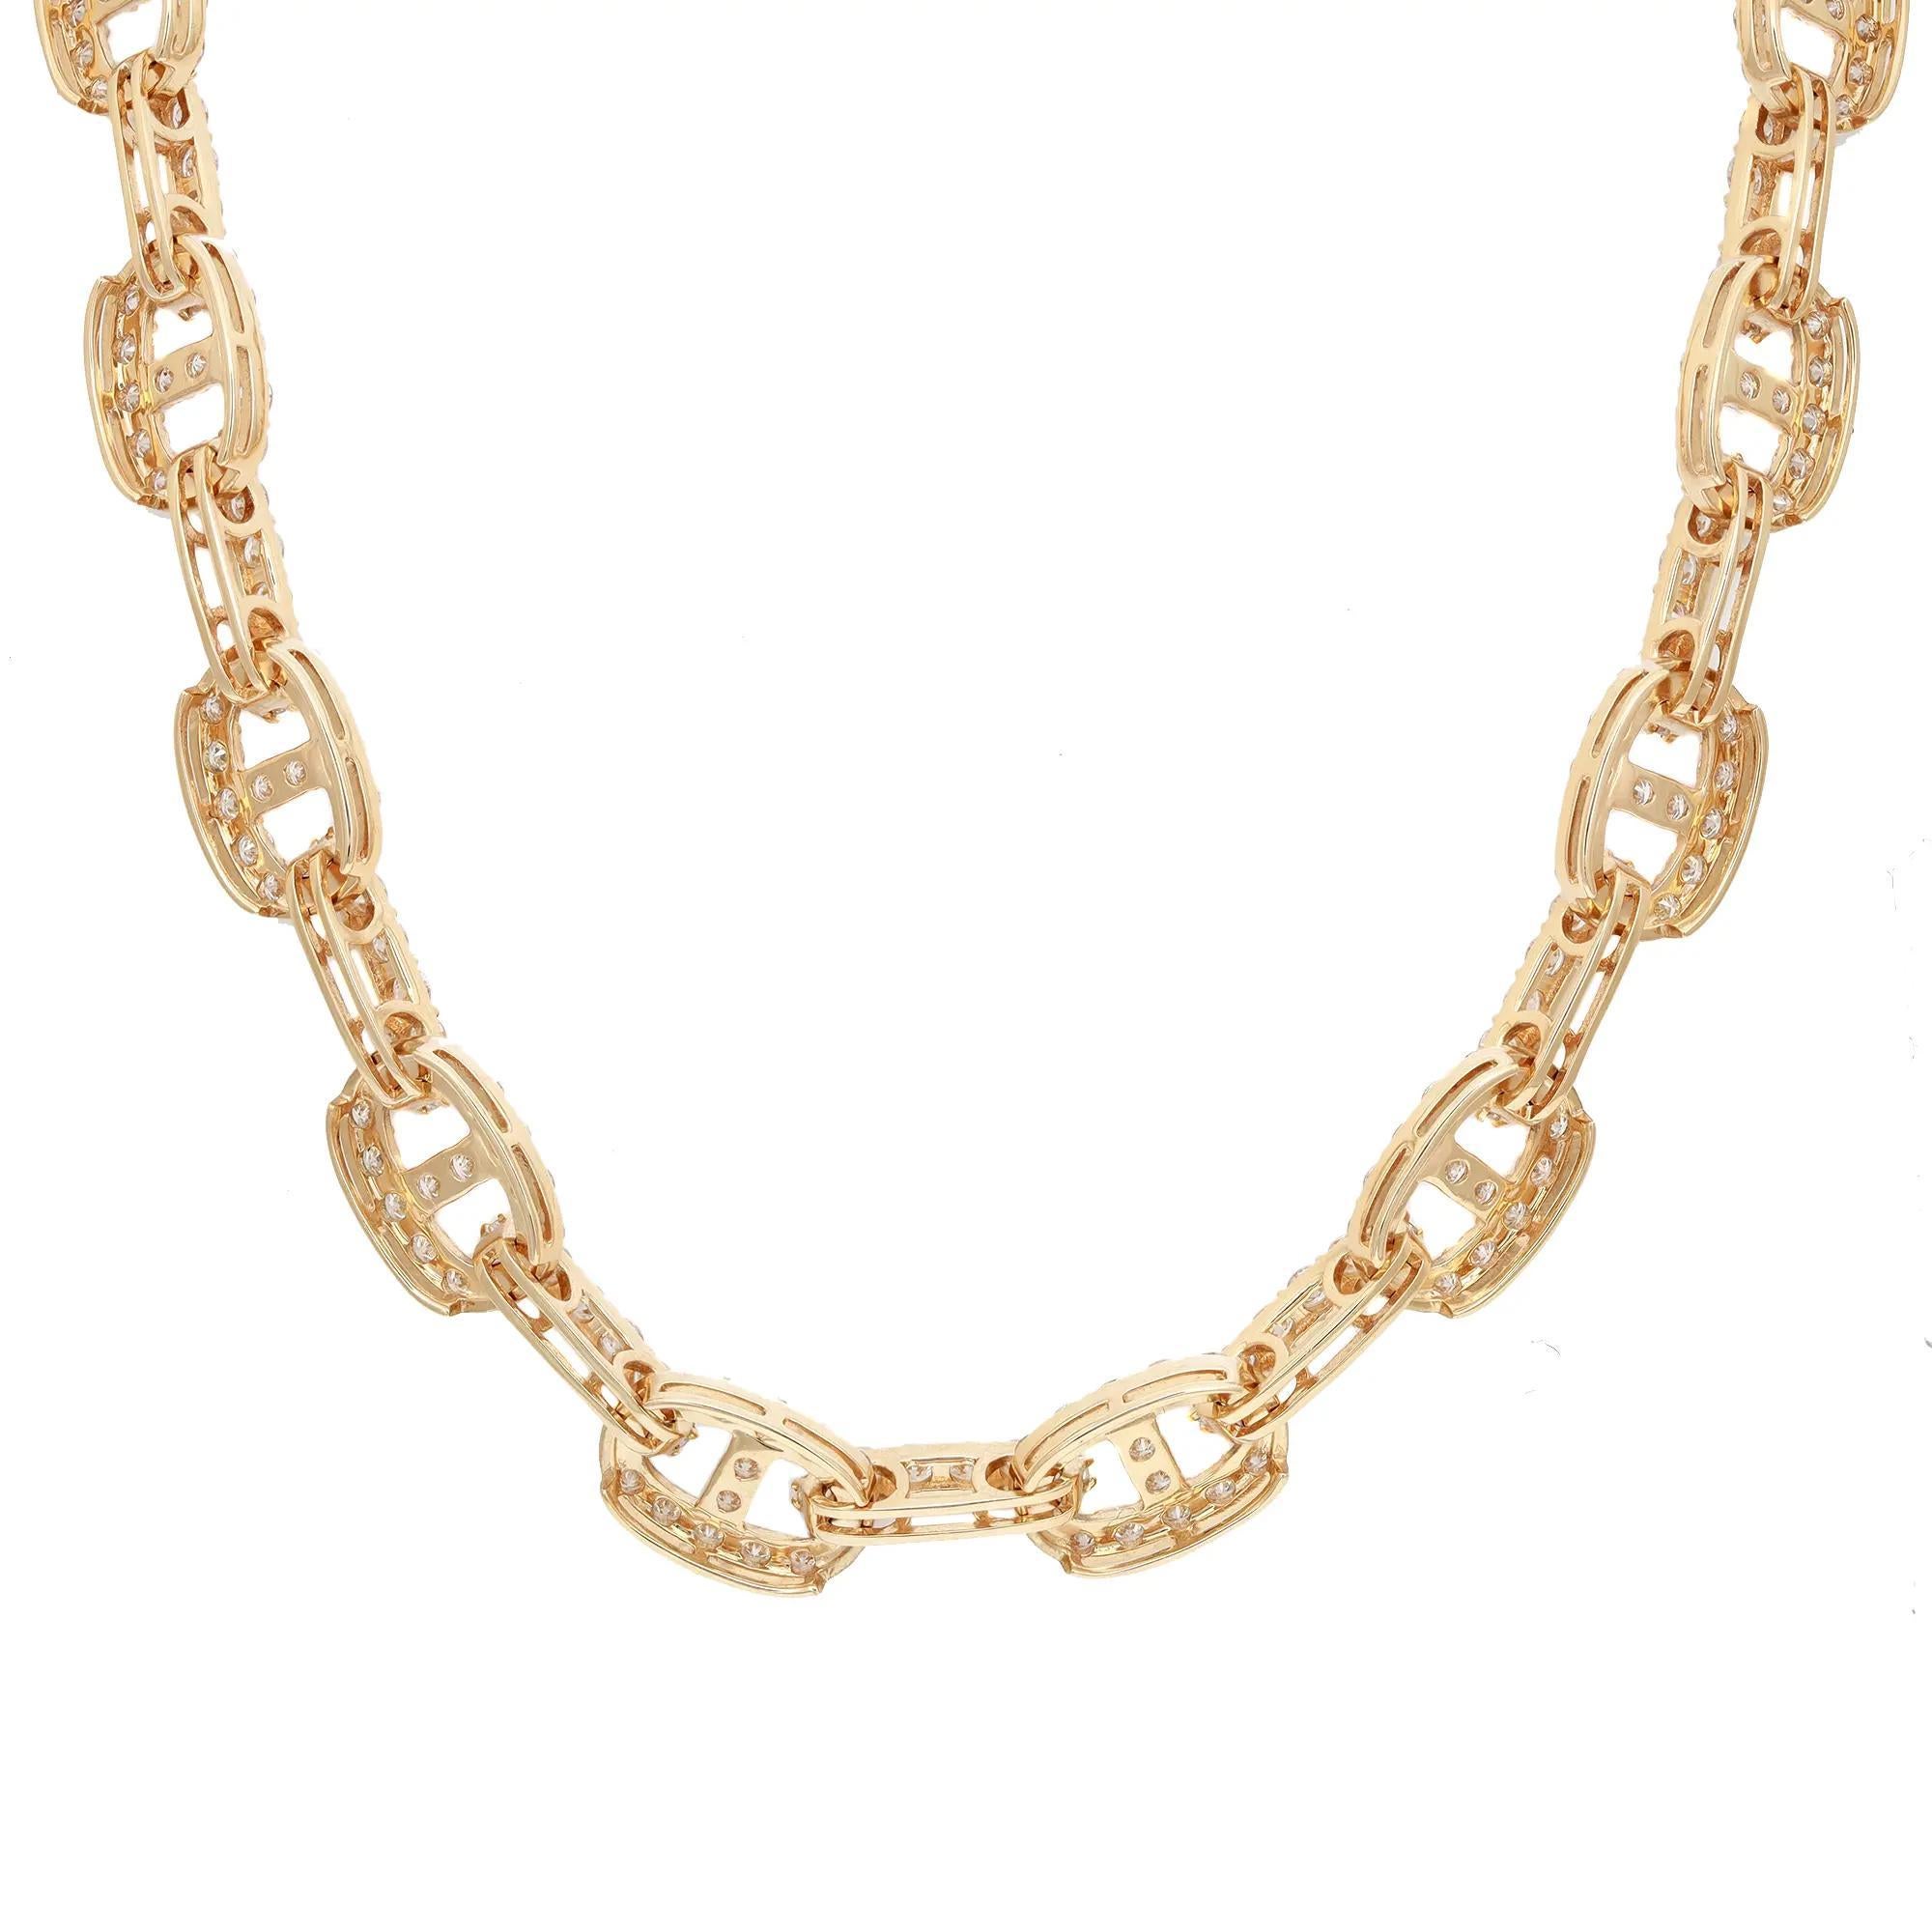 Round Cut Diamond Link Chain Neckalce 18K Yellow Gold 14.95Cttw 17.5 Inches In New Condition For Sale In New York, NY